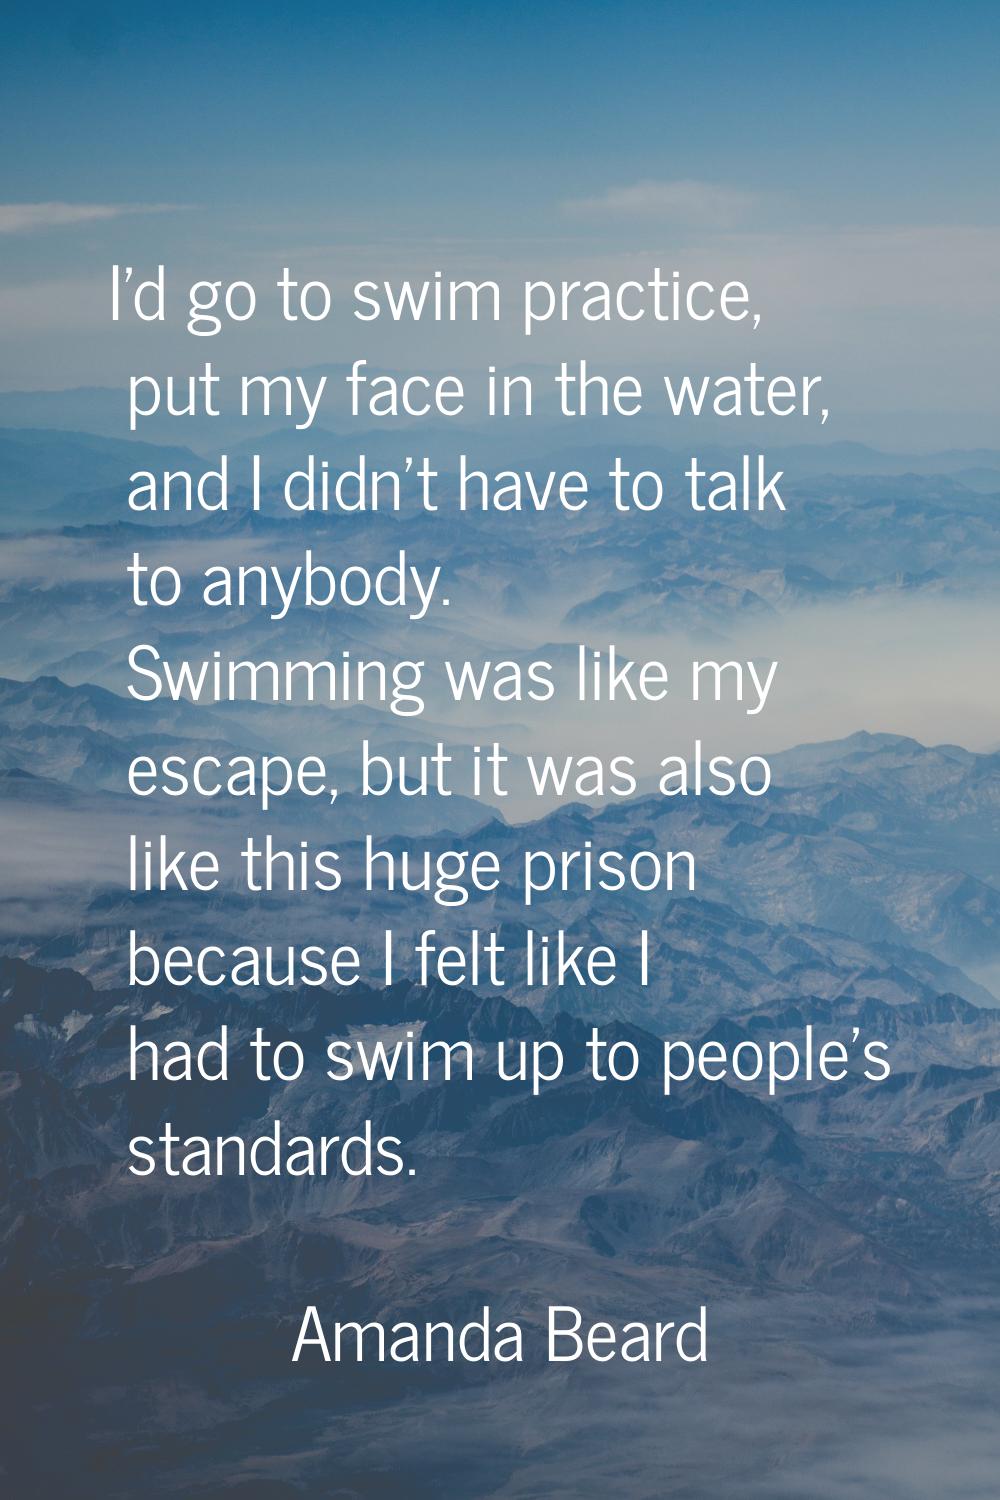 I'd go to swim practice, put my face in the water, and I didn't have to talk to anybody. Swimming w